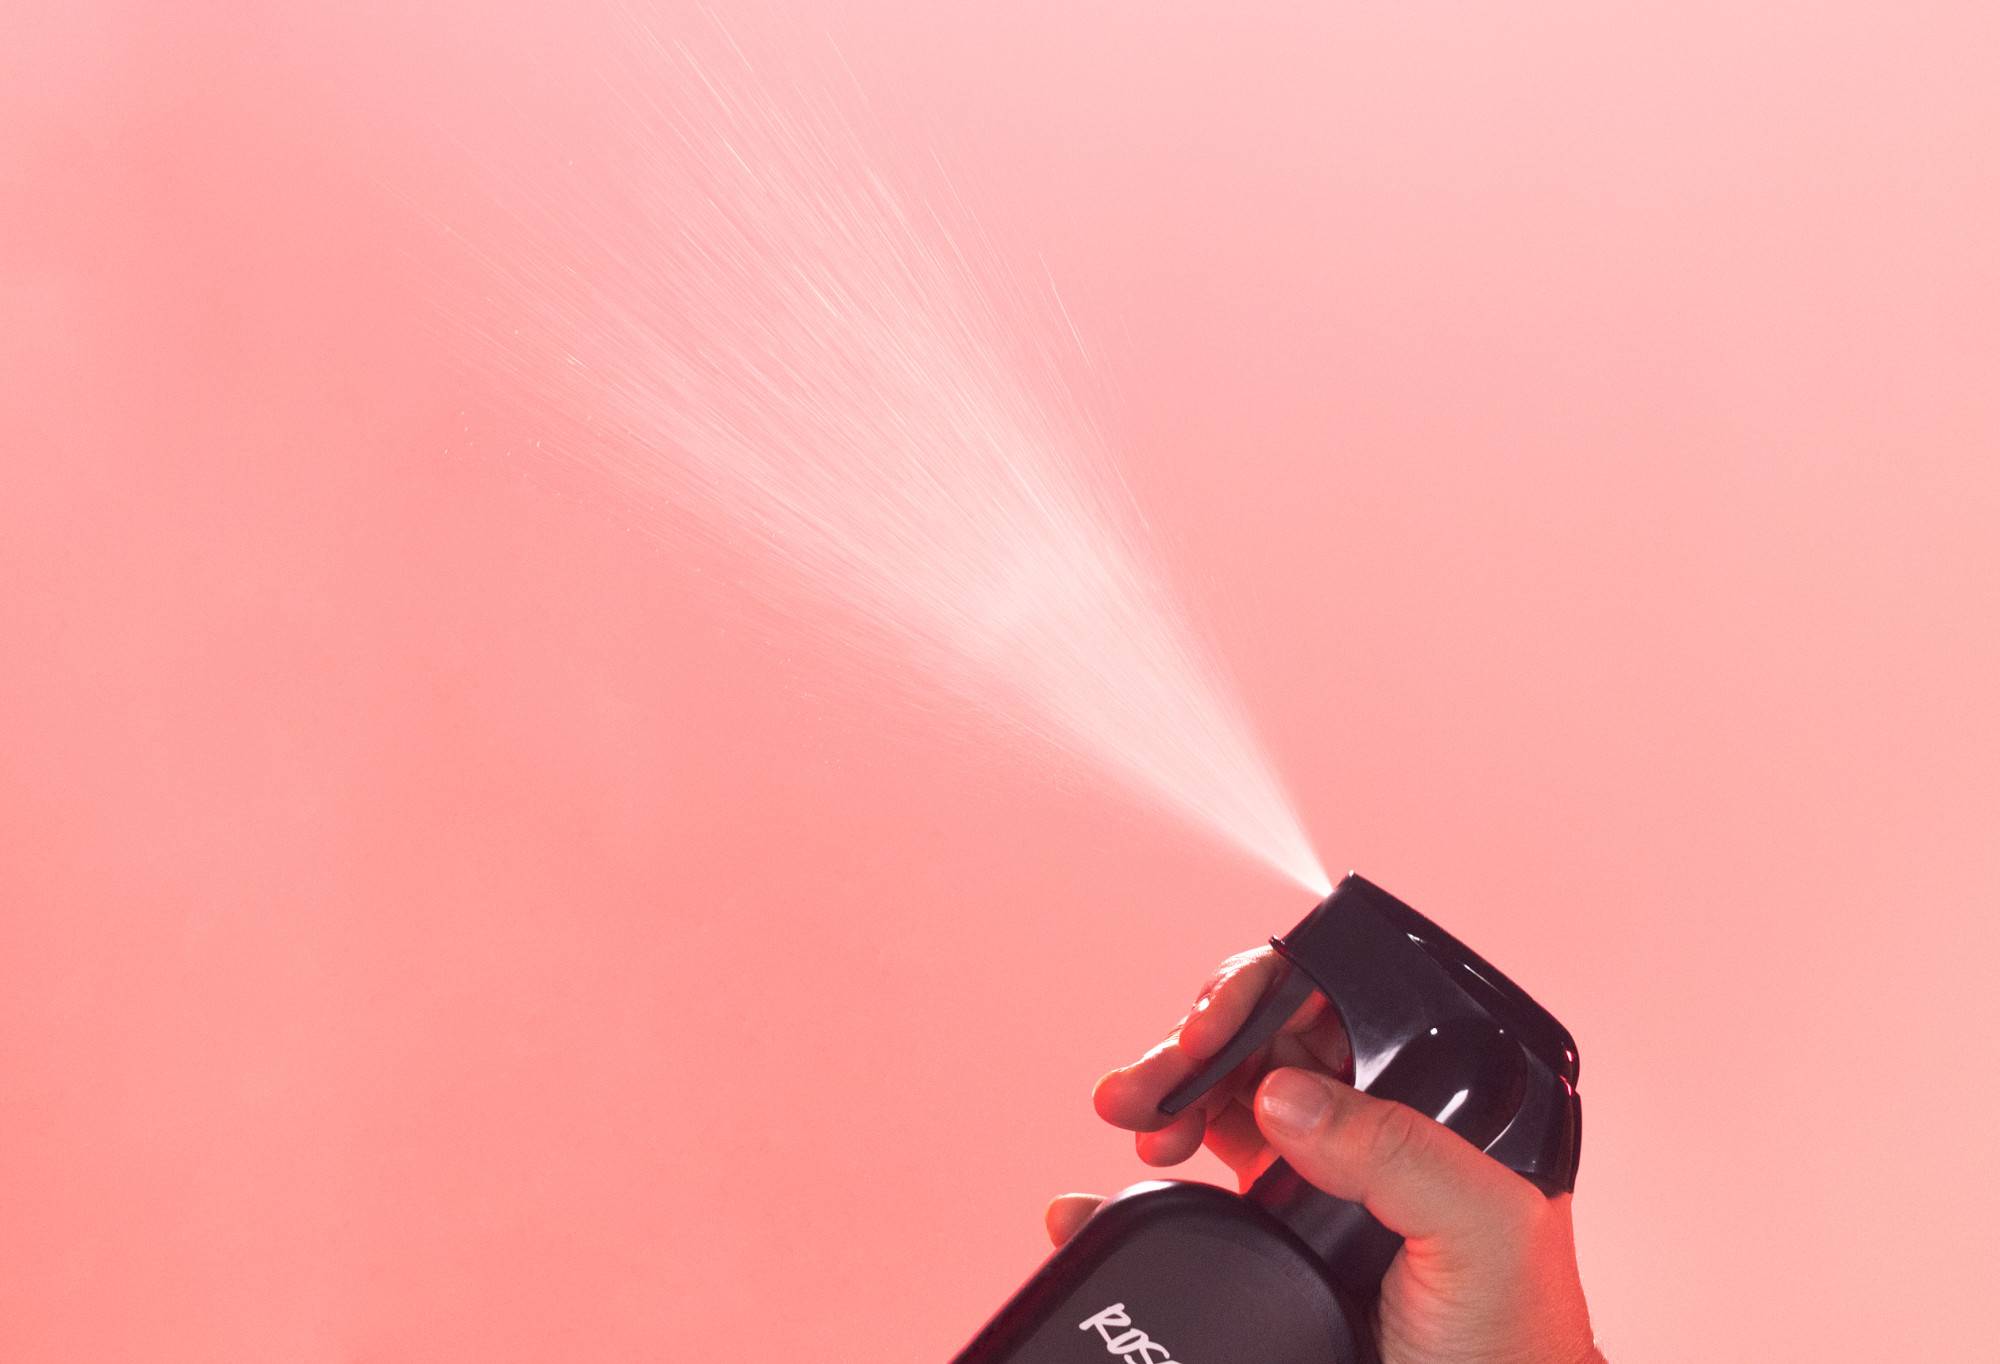 Rose Jam body spray is sprayed up into the air, in front of a vibrant, rosy pink background.